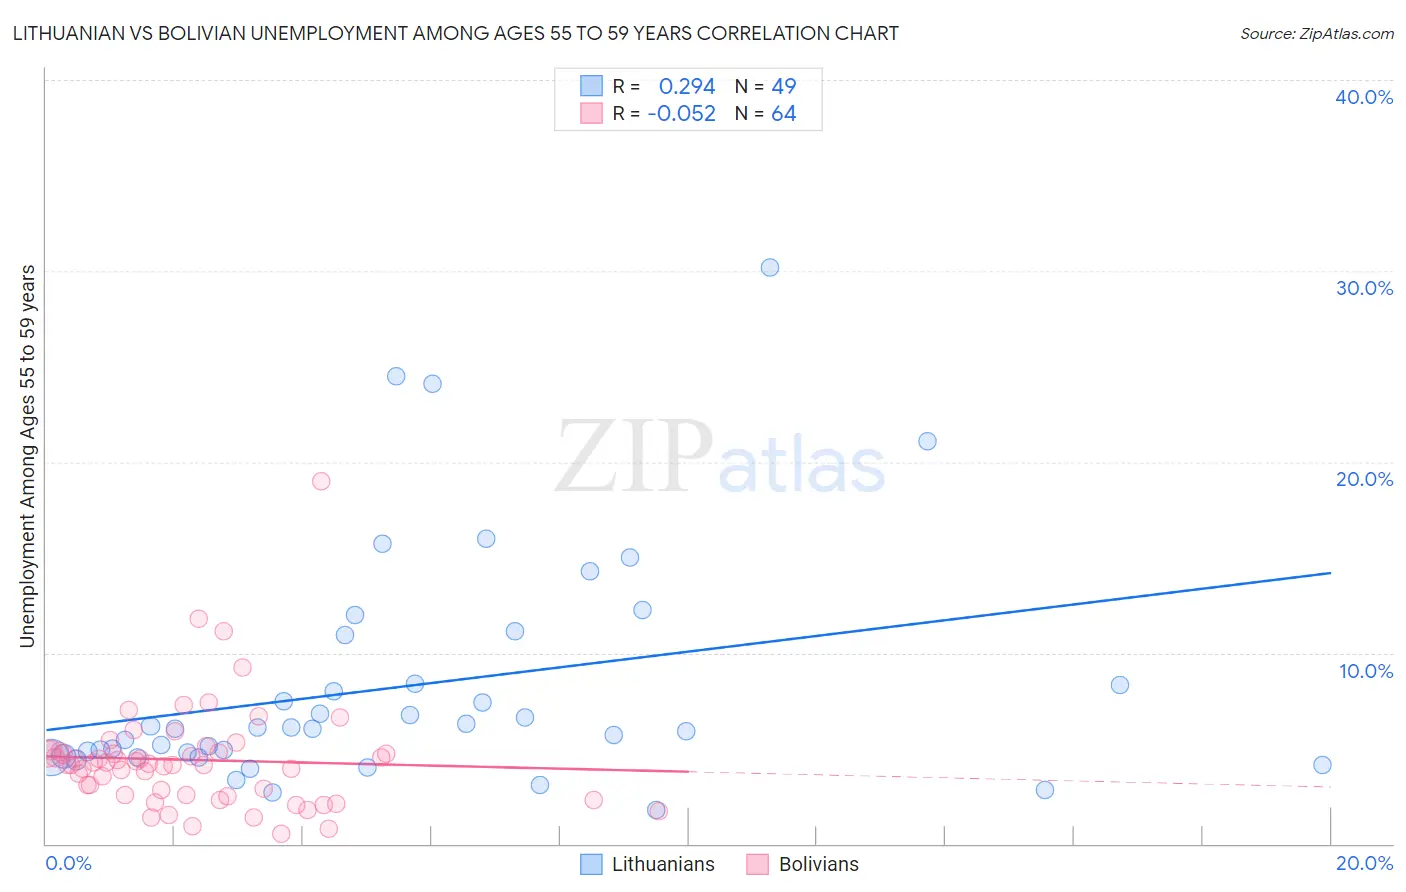 Lithuanian vs Bolivian Unemployment Among Ages 55 to 59 years